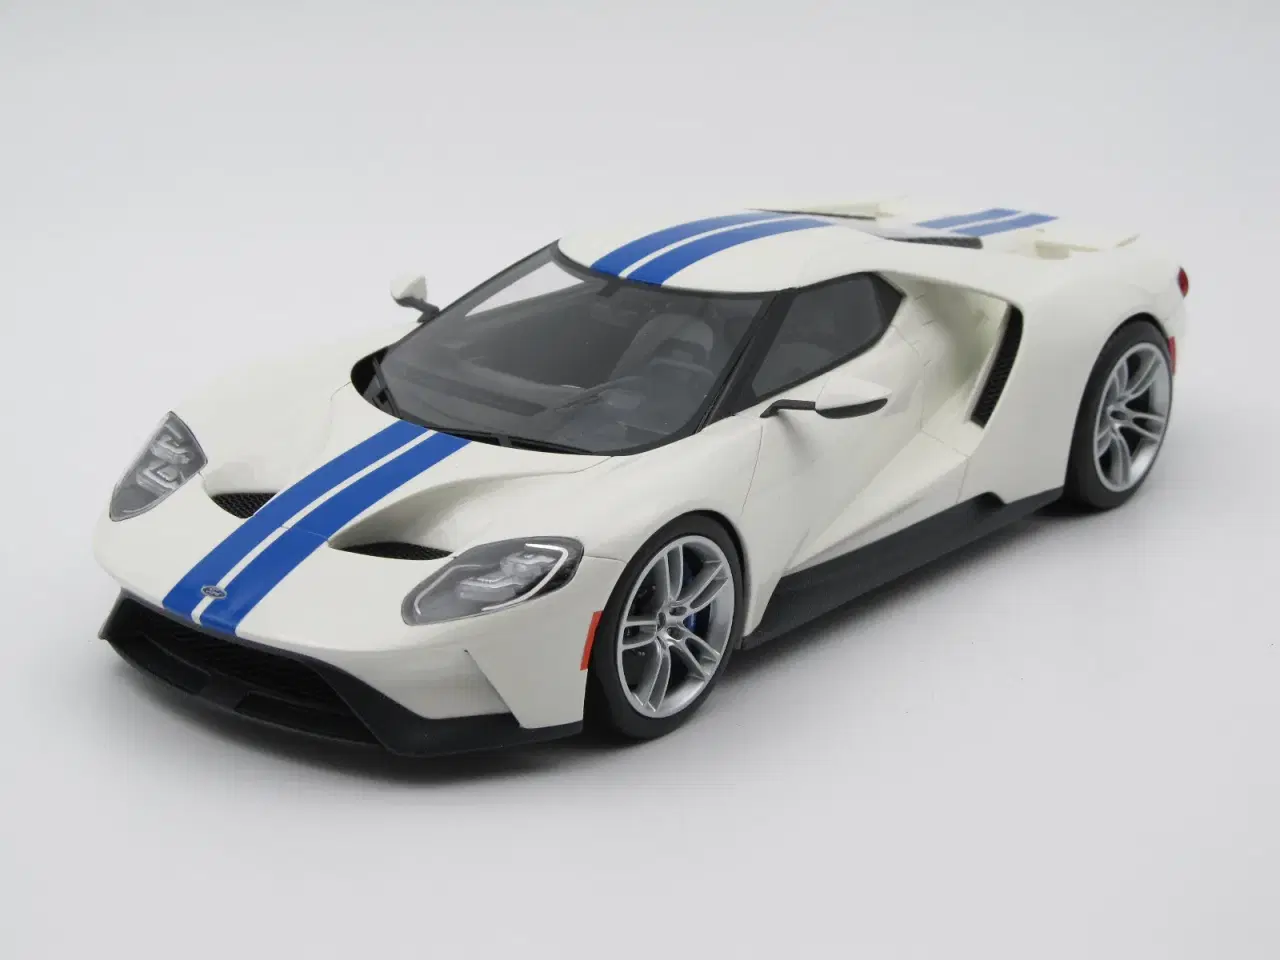 Billede 2 - 2016 Ford GT Shelby Limited Edition - 1:18